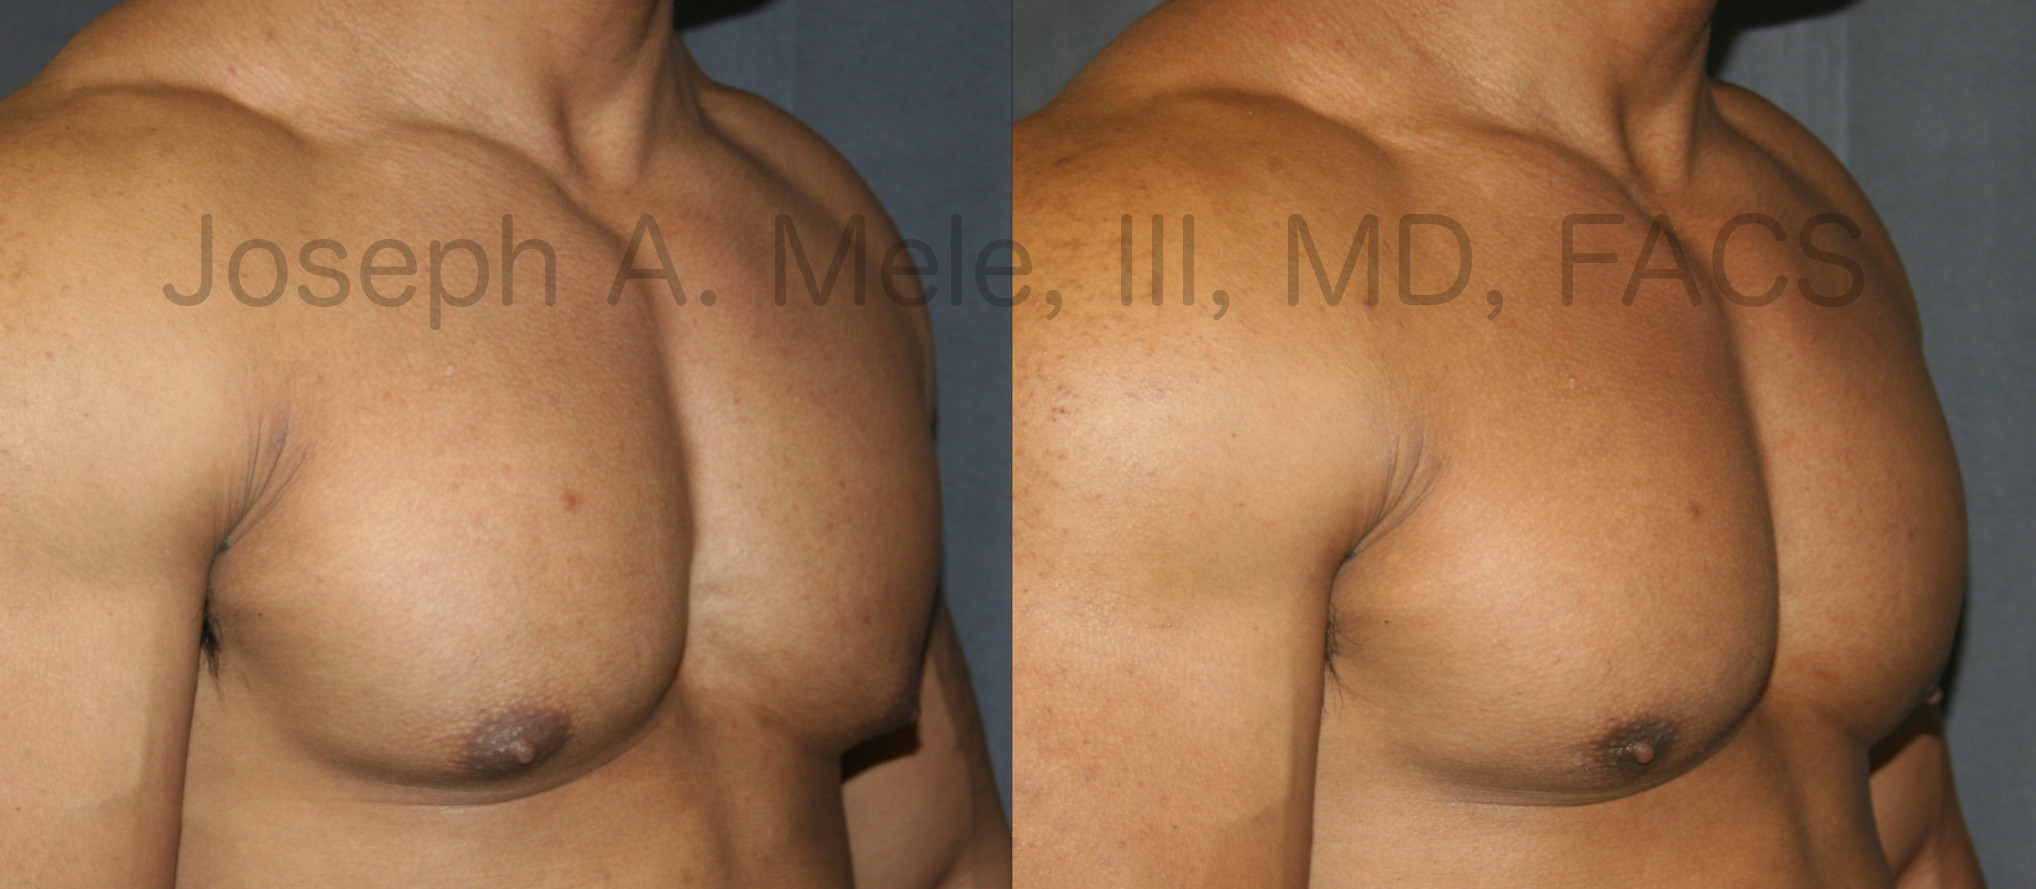 Liposuction can be used for male gynecomastia reduction in selected cases. If the fullness beneath the nipple is fat, liposuction can help. If it is glandular tissue, direct excision of the gland is needed.